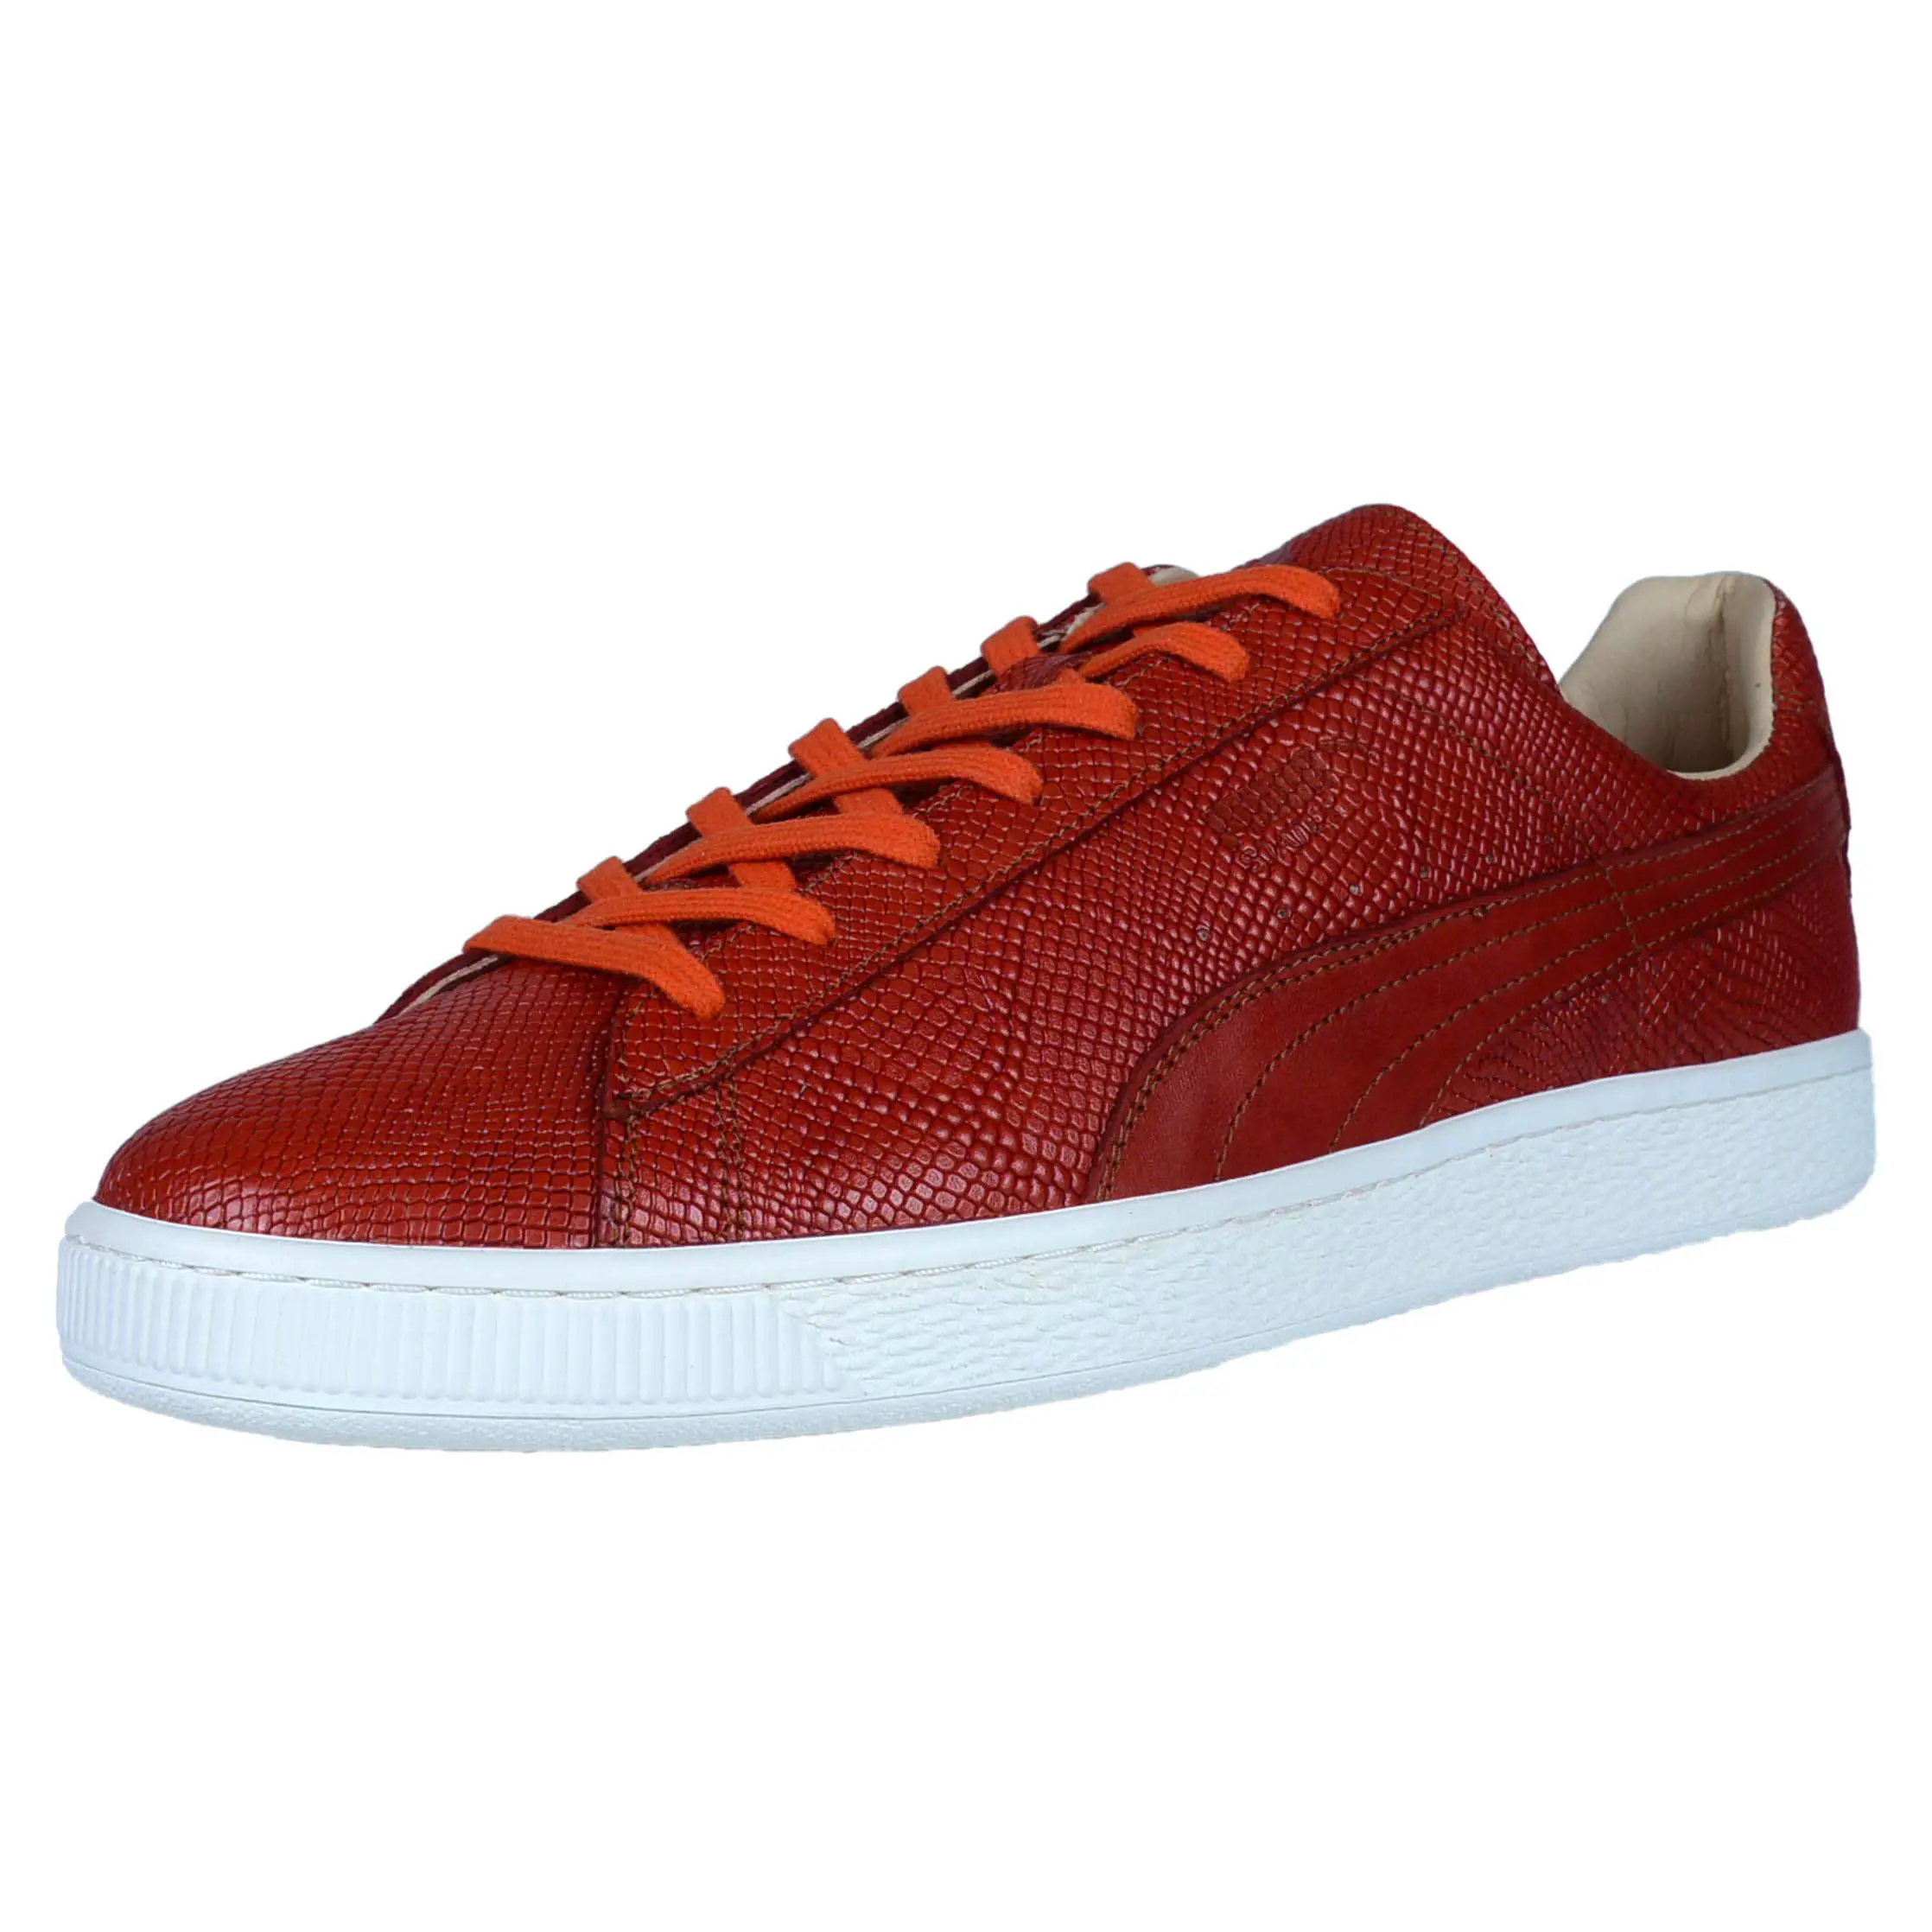 PUMA STATES MII (MADE IN ITALY) FASHION SNEAKERS MANDARIN RED WHITE ...